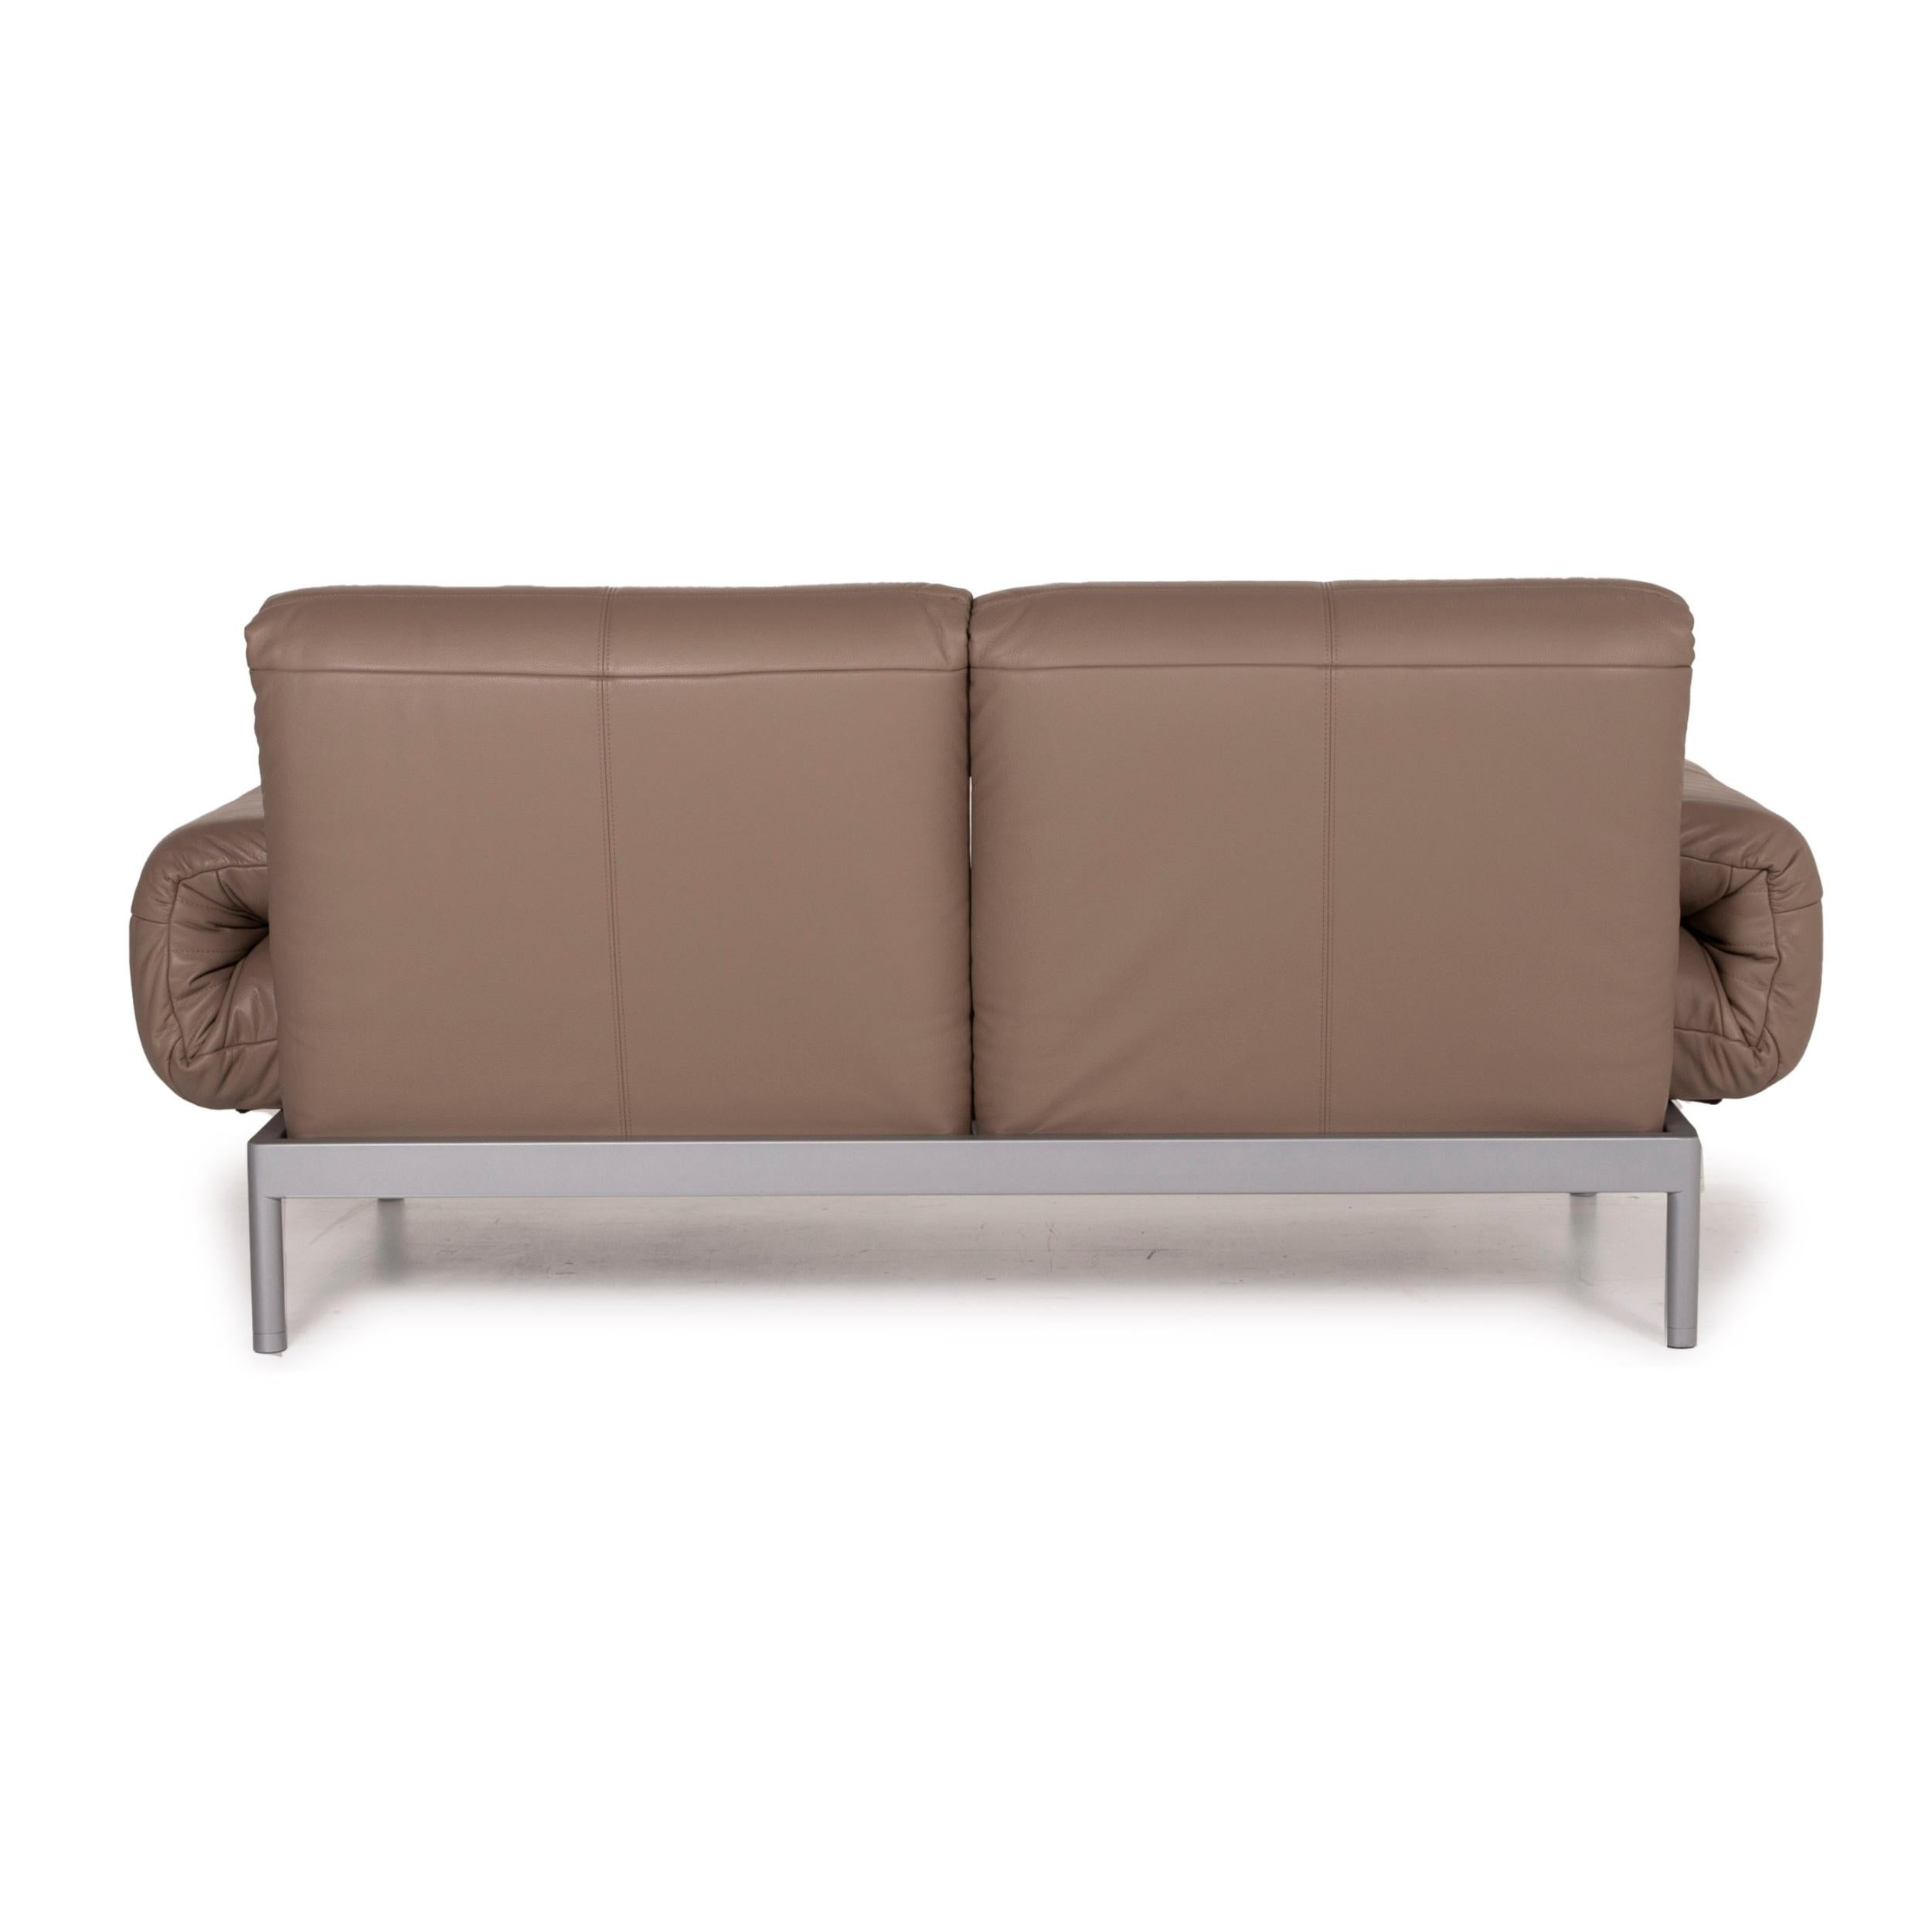 Rolf Benz Plura Leather Sofa Brown Two-Seater Function Reclining Function 5